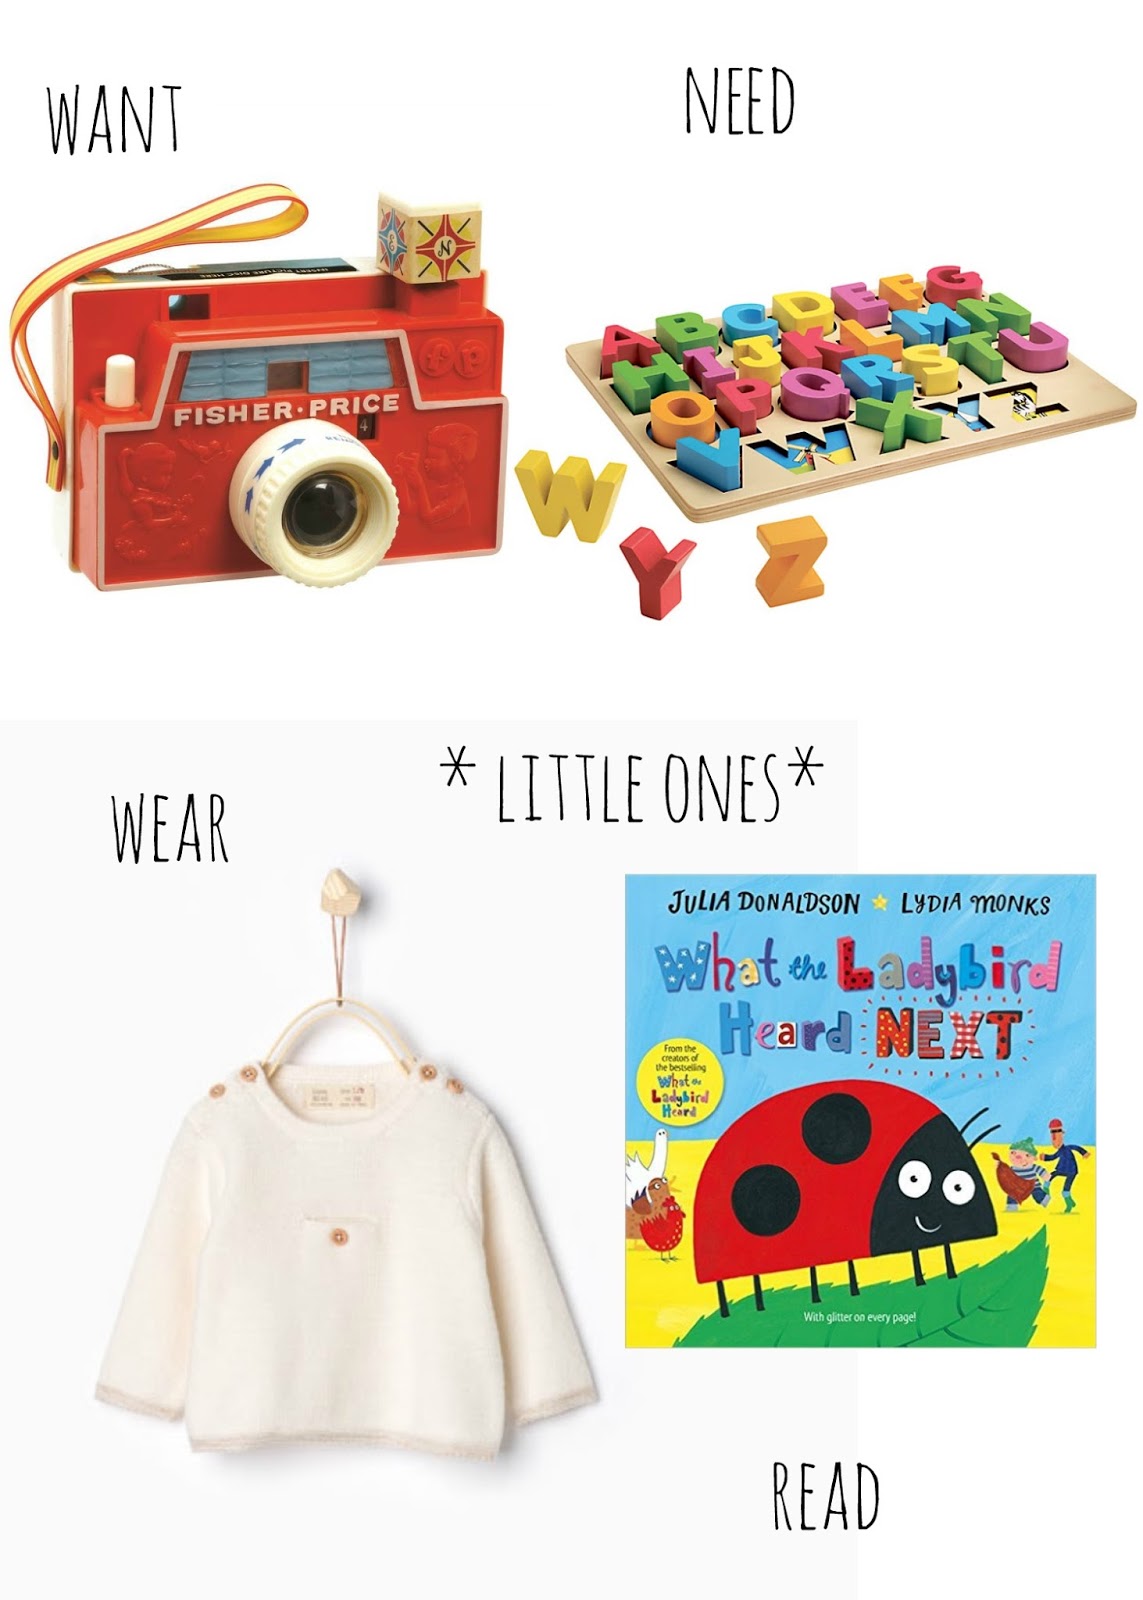 mamasVIb | V. I. BUYS: The simple Christmas gift guide for busy mums under pressure! Part 2 *KIDS*, kids christmas gifts, gifts for kids, boys gifts, girls gifts, christmas gift guide, mamasvib, stylist, guide to christmas, kids present ideas, babies first christmas, gifts for children, presents, buys for christmas, edited gift guide